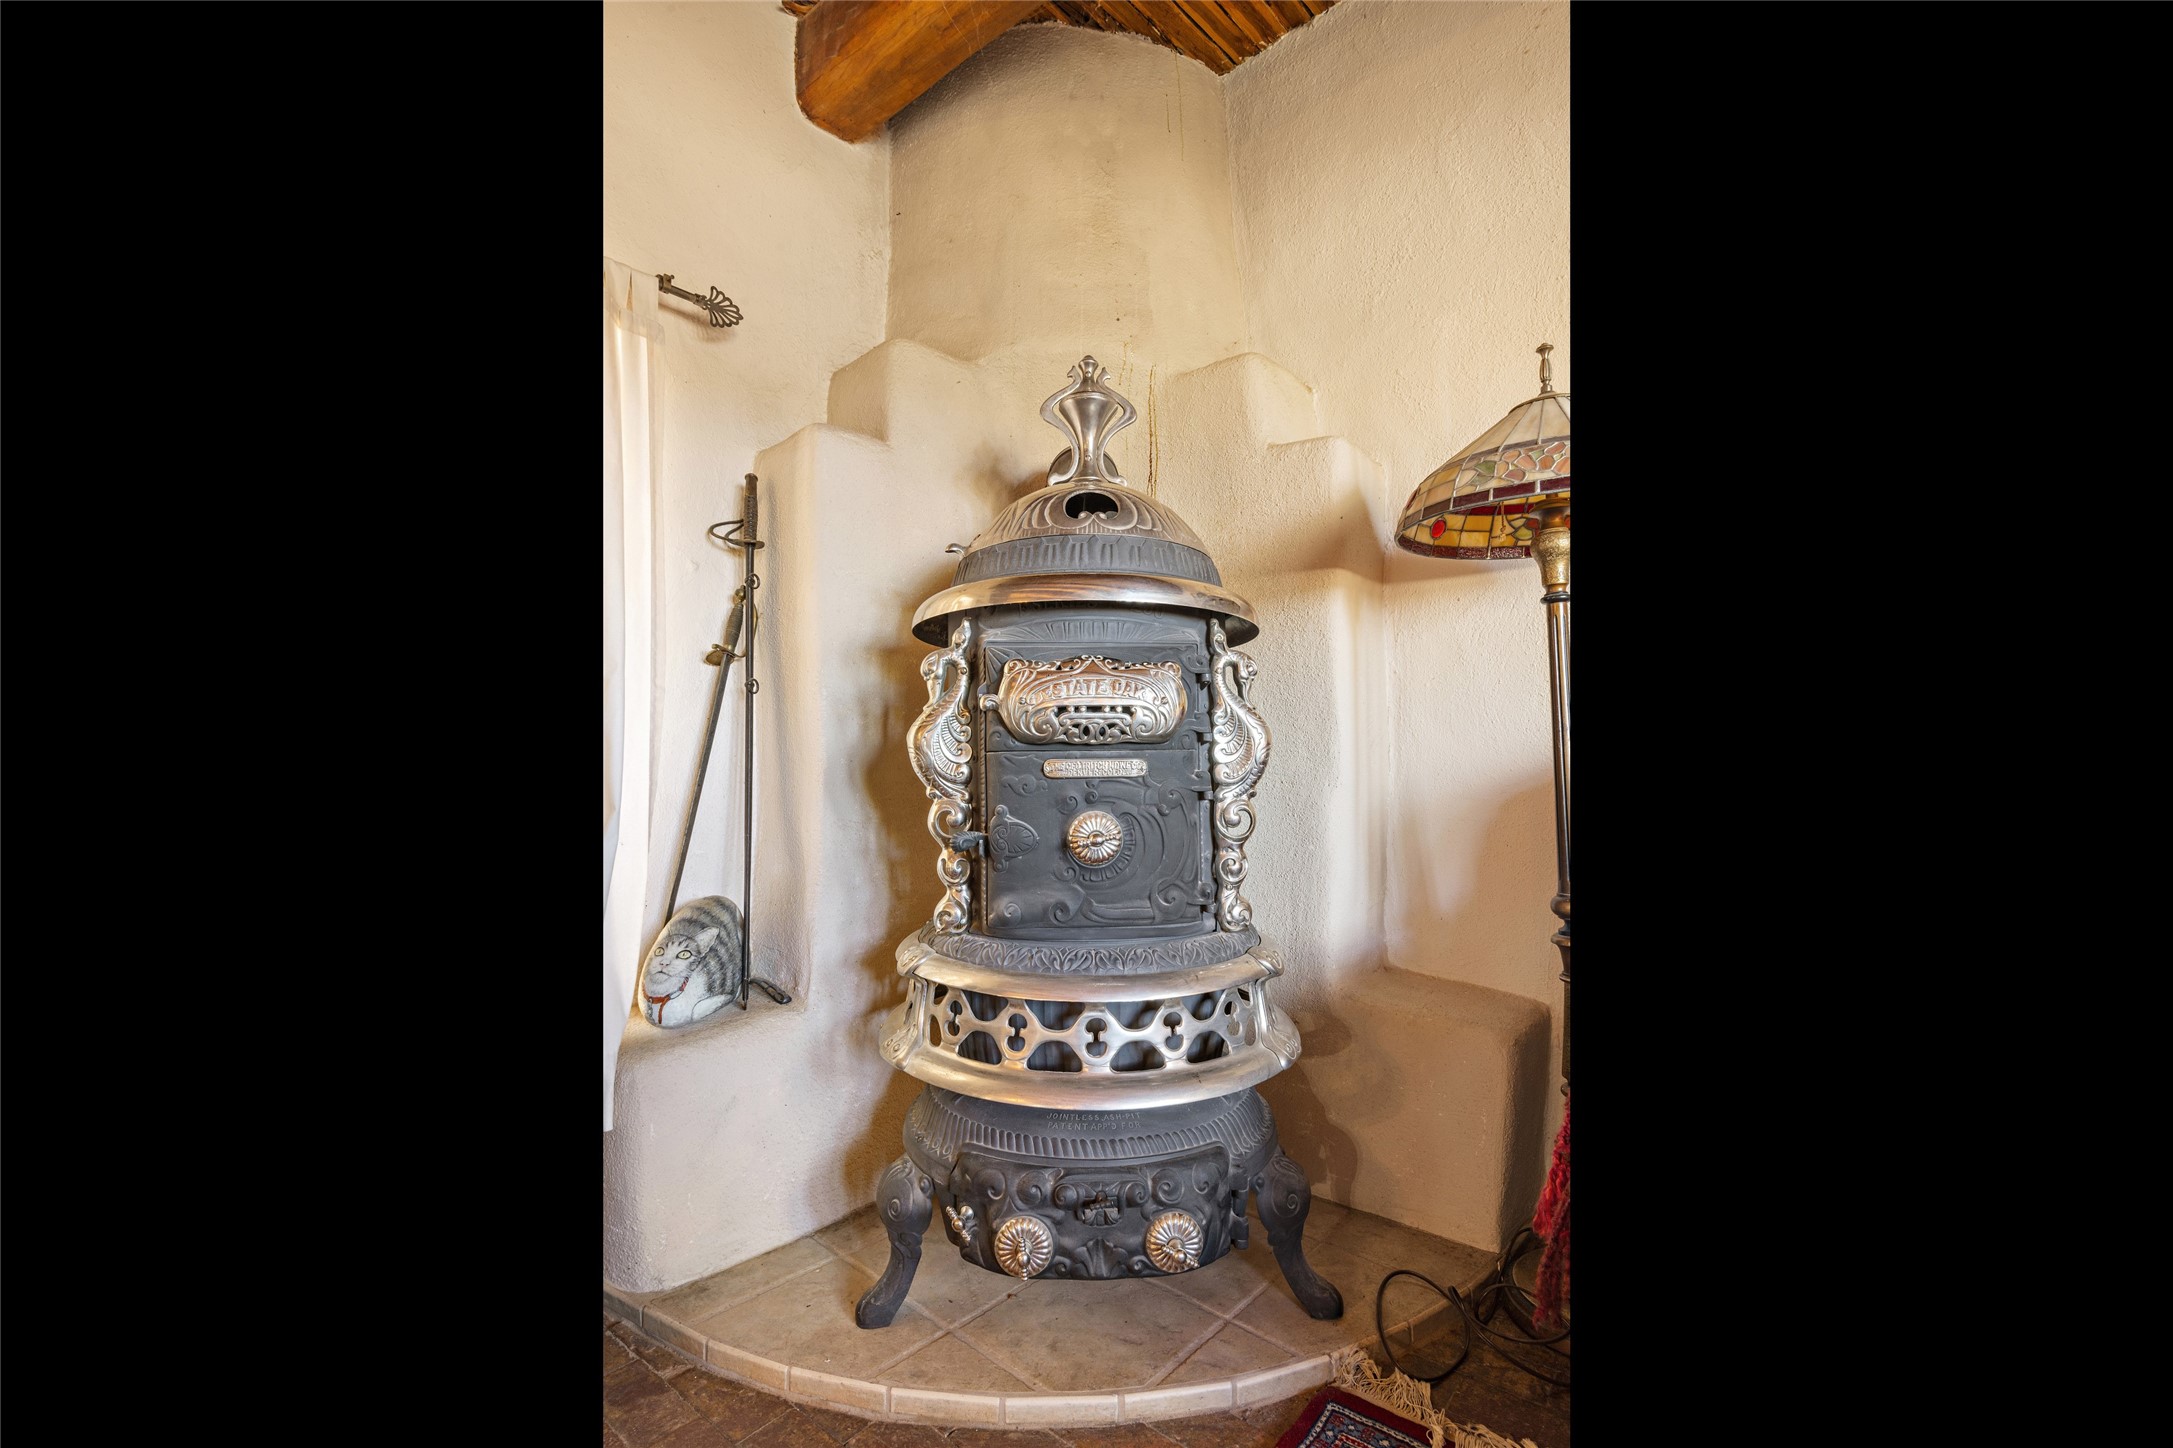 Wood stove in living room